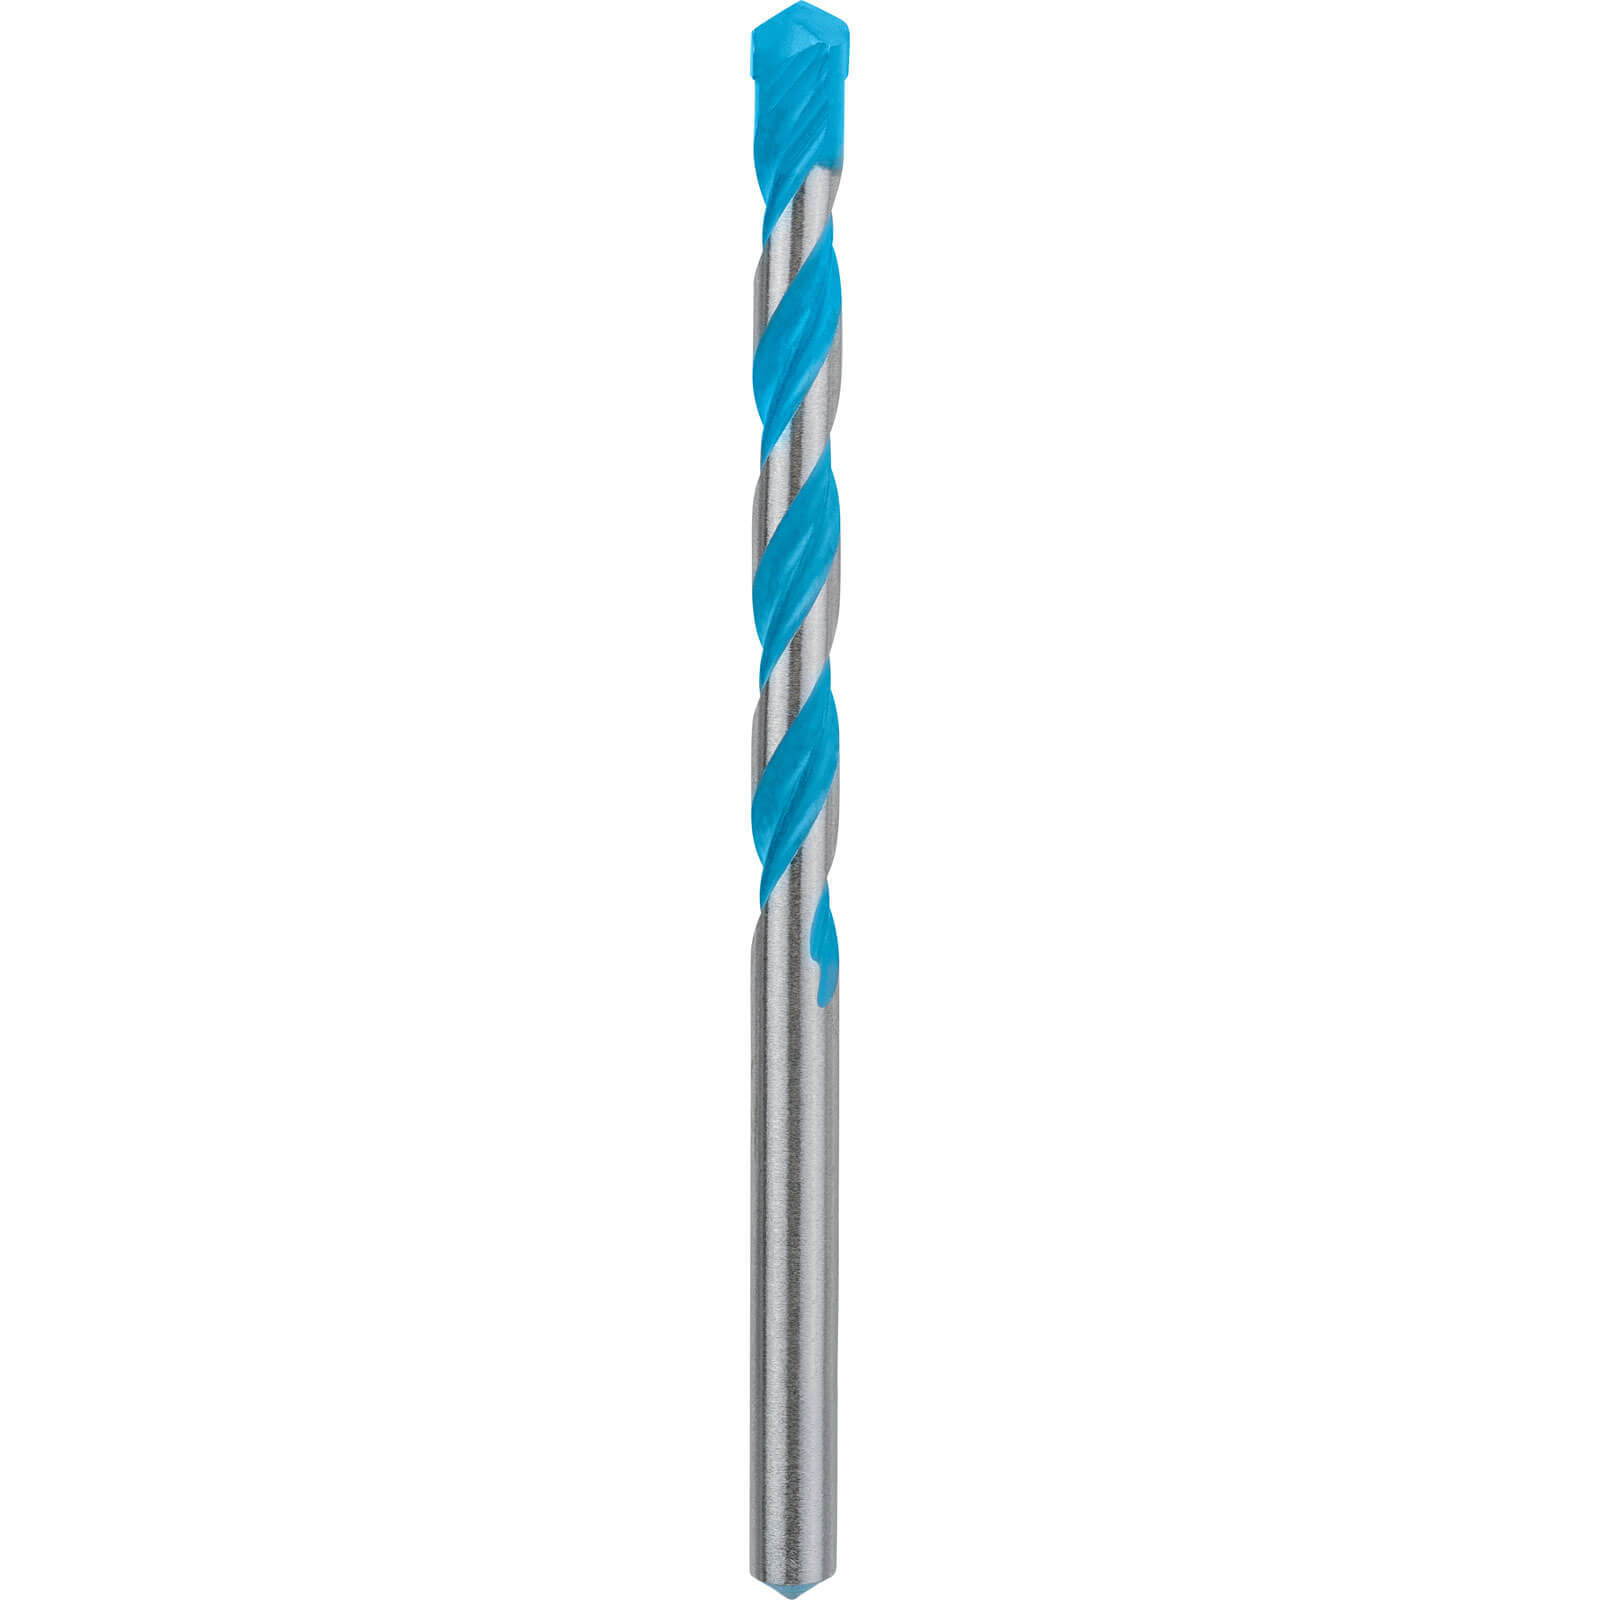 Photo of Bosch Expert Cyl-9 Multi Construction Drill Bit 6mm 100mm Pack Of 1